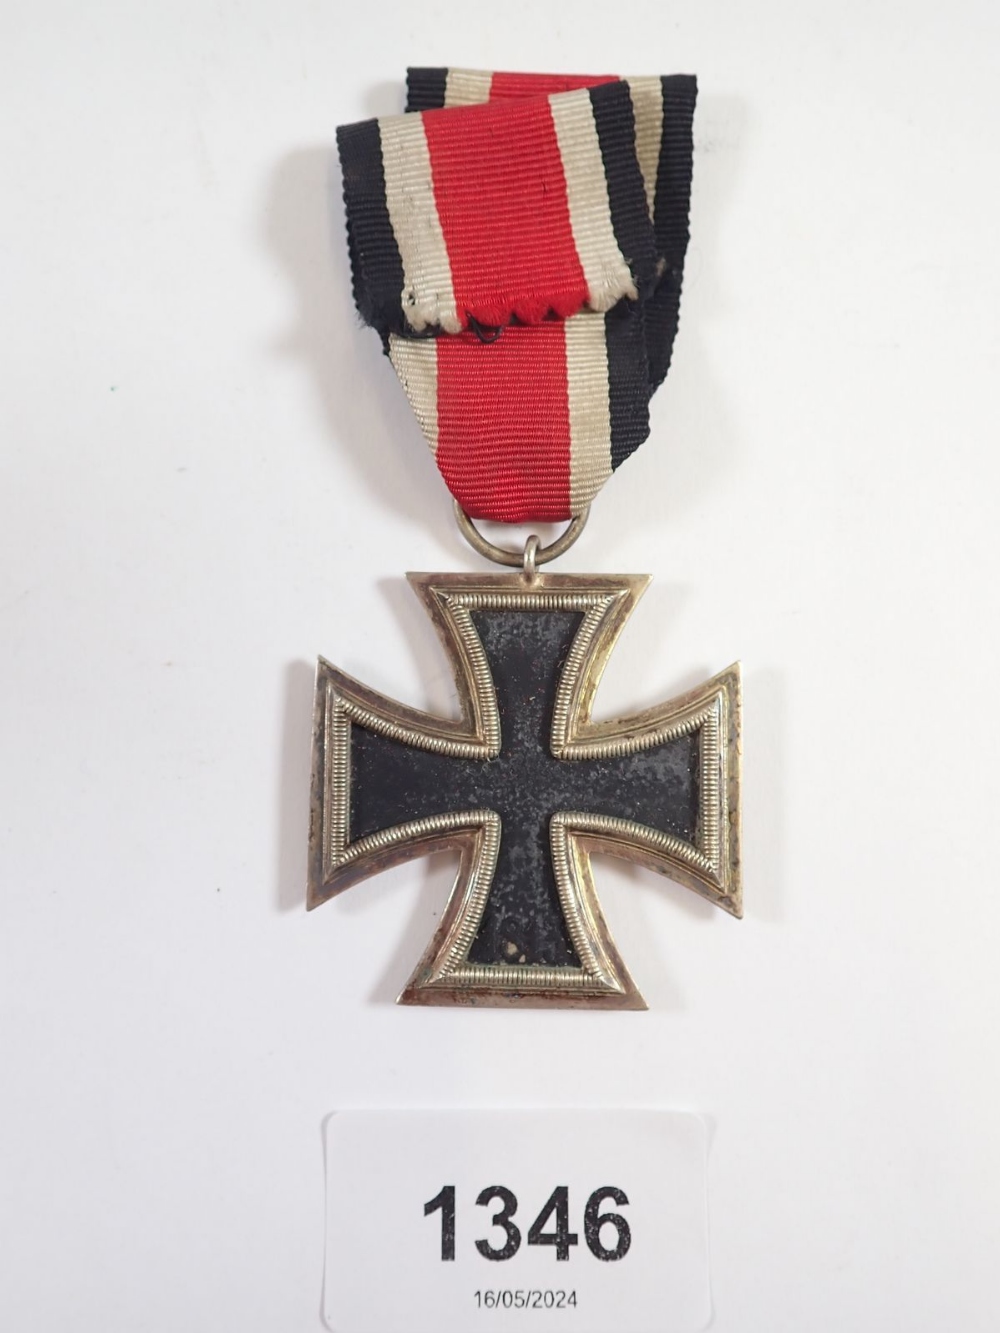 A WWII German iron cross - boxed with ribbon - Image 3 of 3